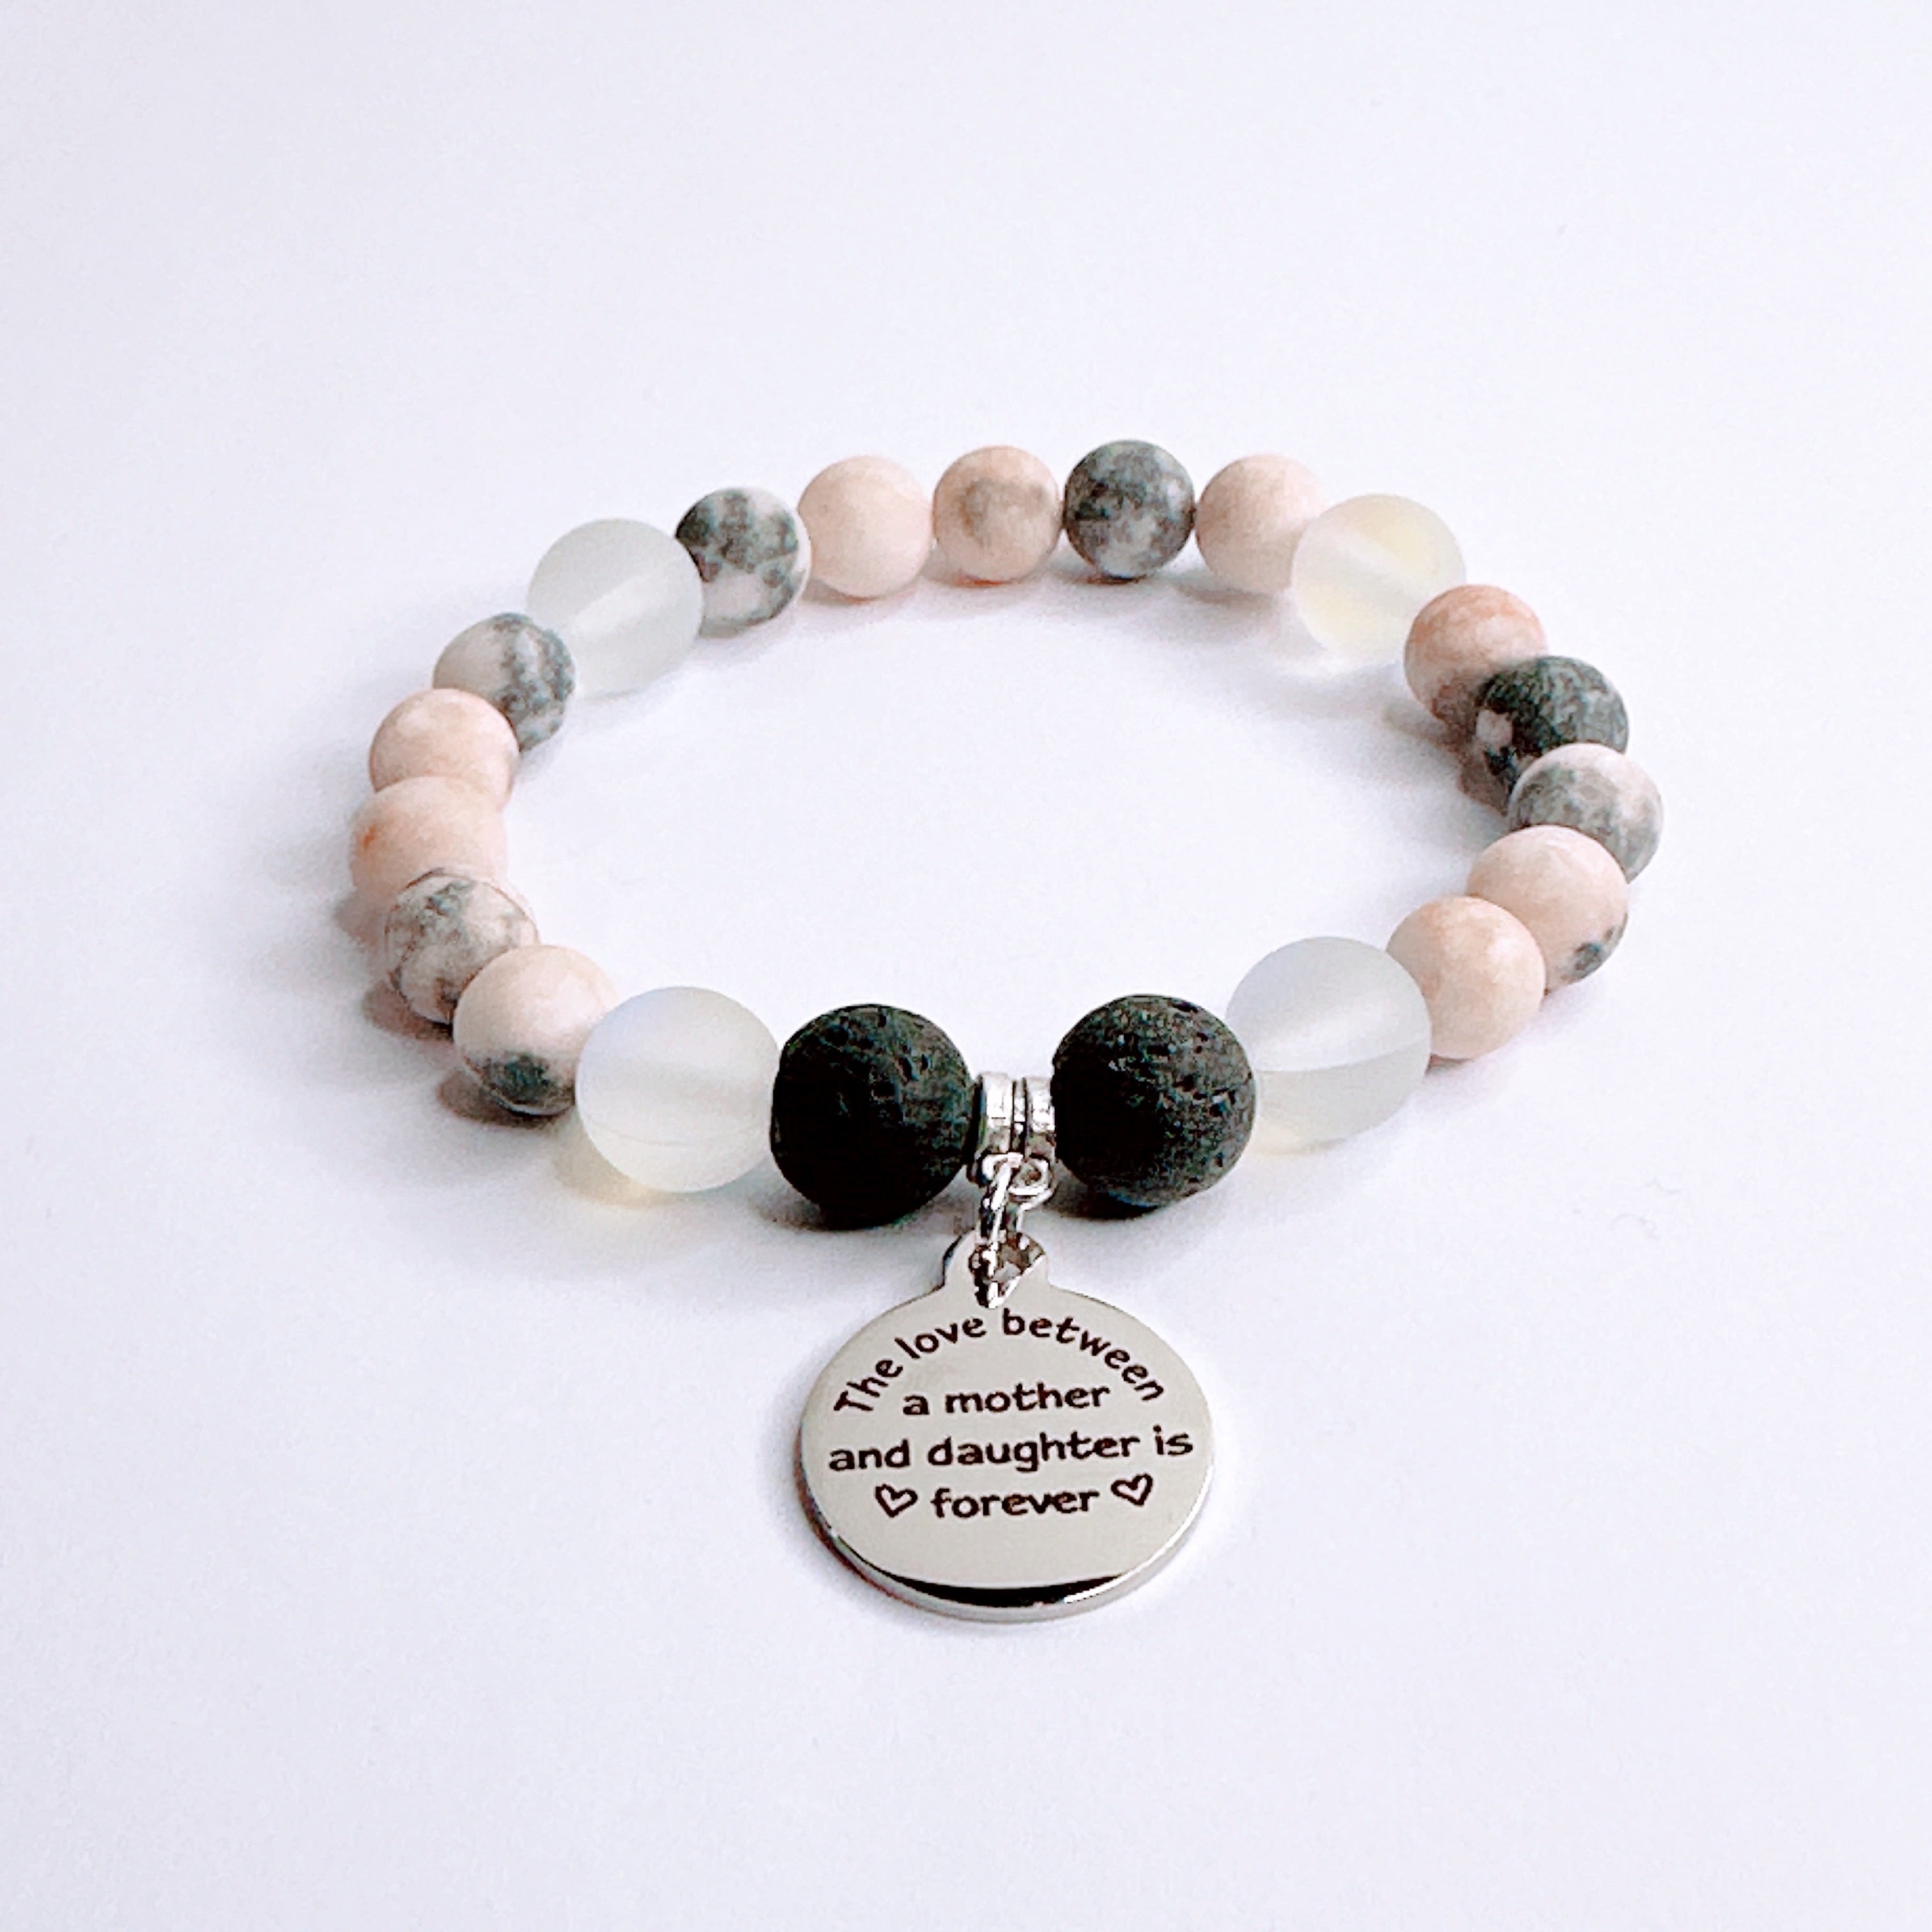 The Love Between a Mother &amp; Daughter Charm Bracelet Lava